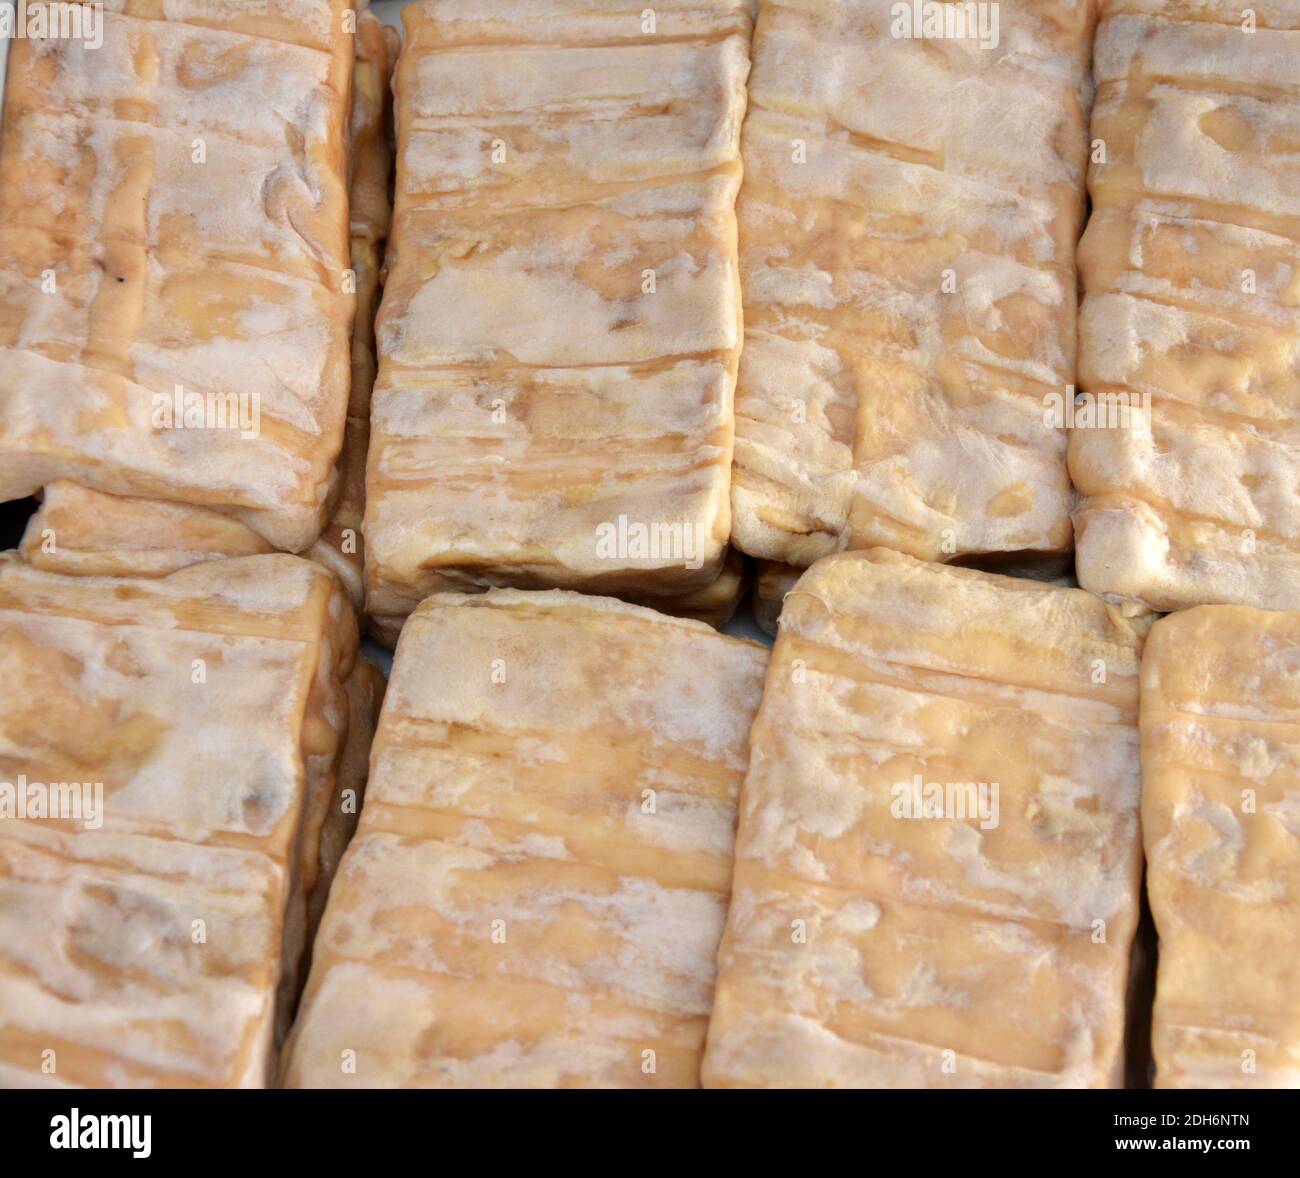 groups of hairy and stinky tofu on the stall for selling Stock Photo